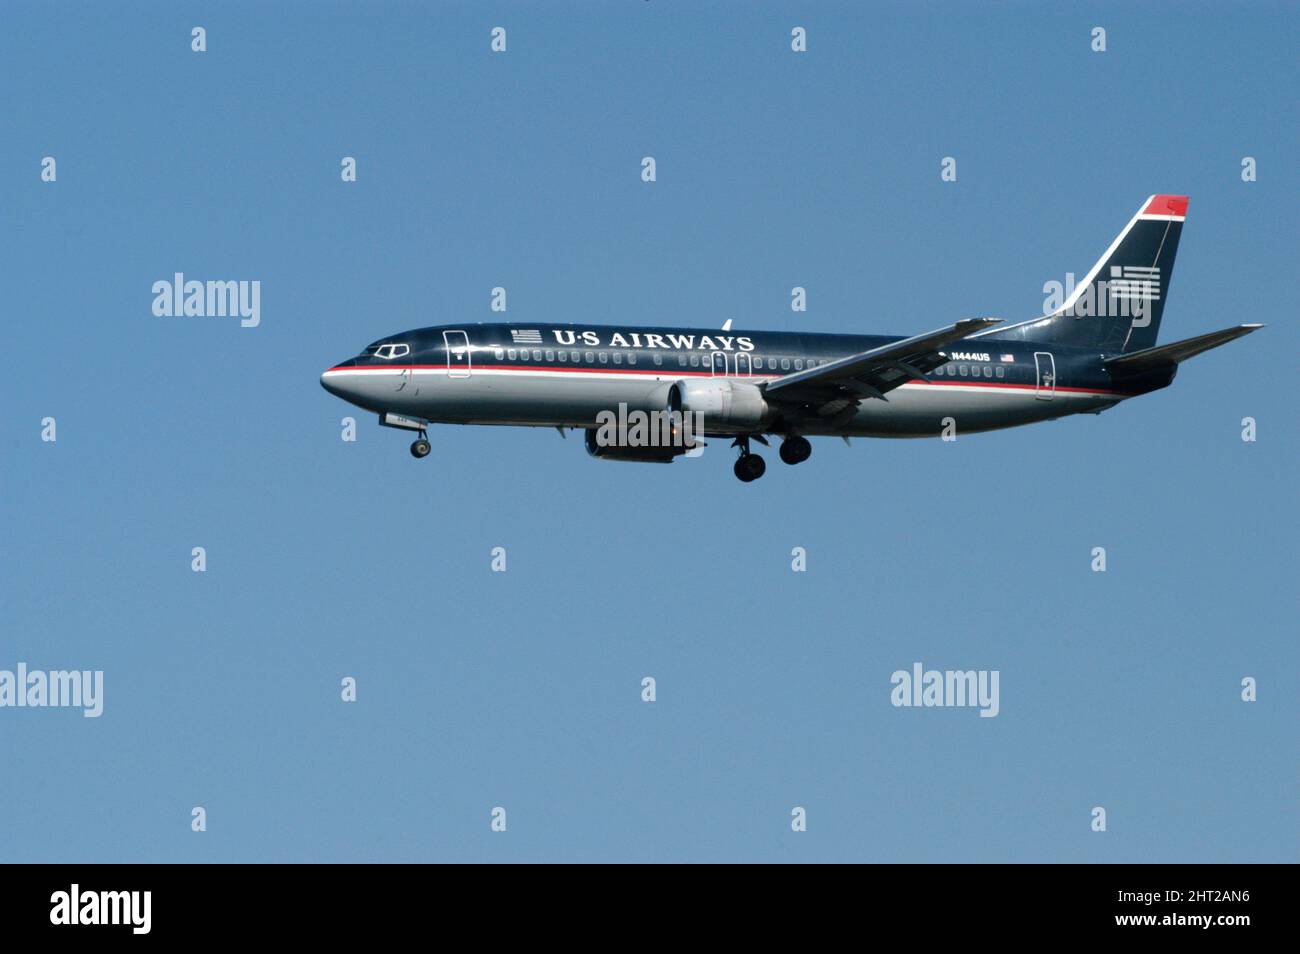 Airplane in the air -- US Airways Boeing 737 Stock Photo